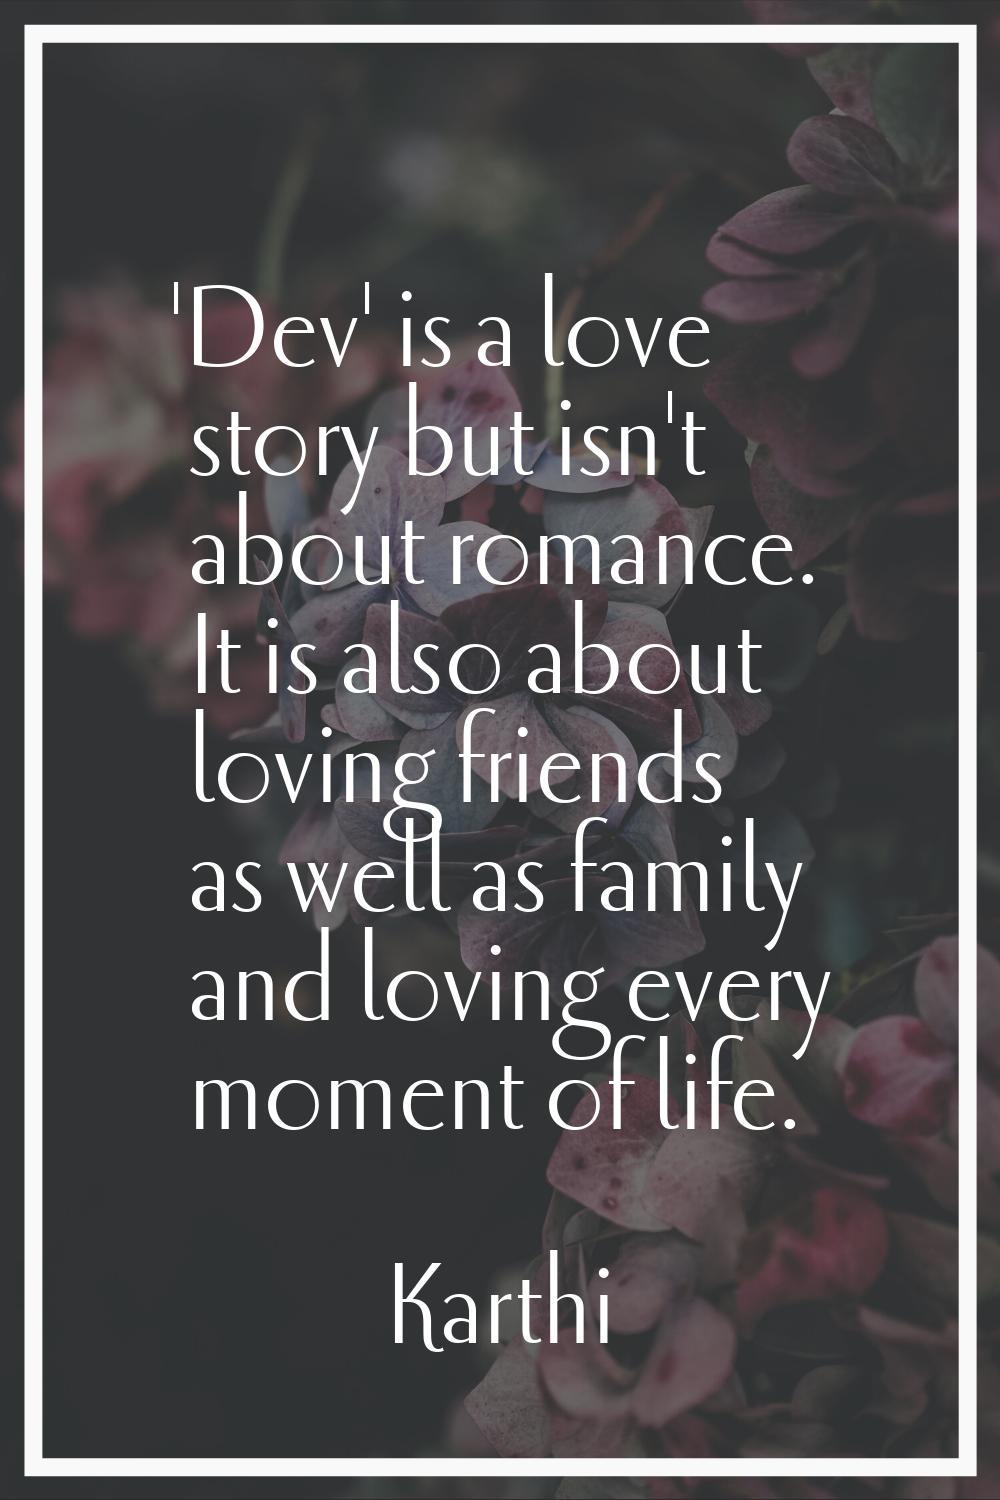 'Dev' is a love story but isn't about romance. It is also about loving friends as well as family an